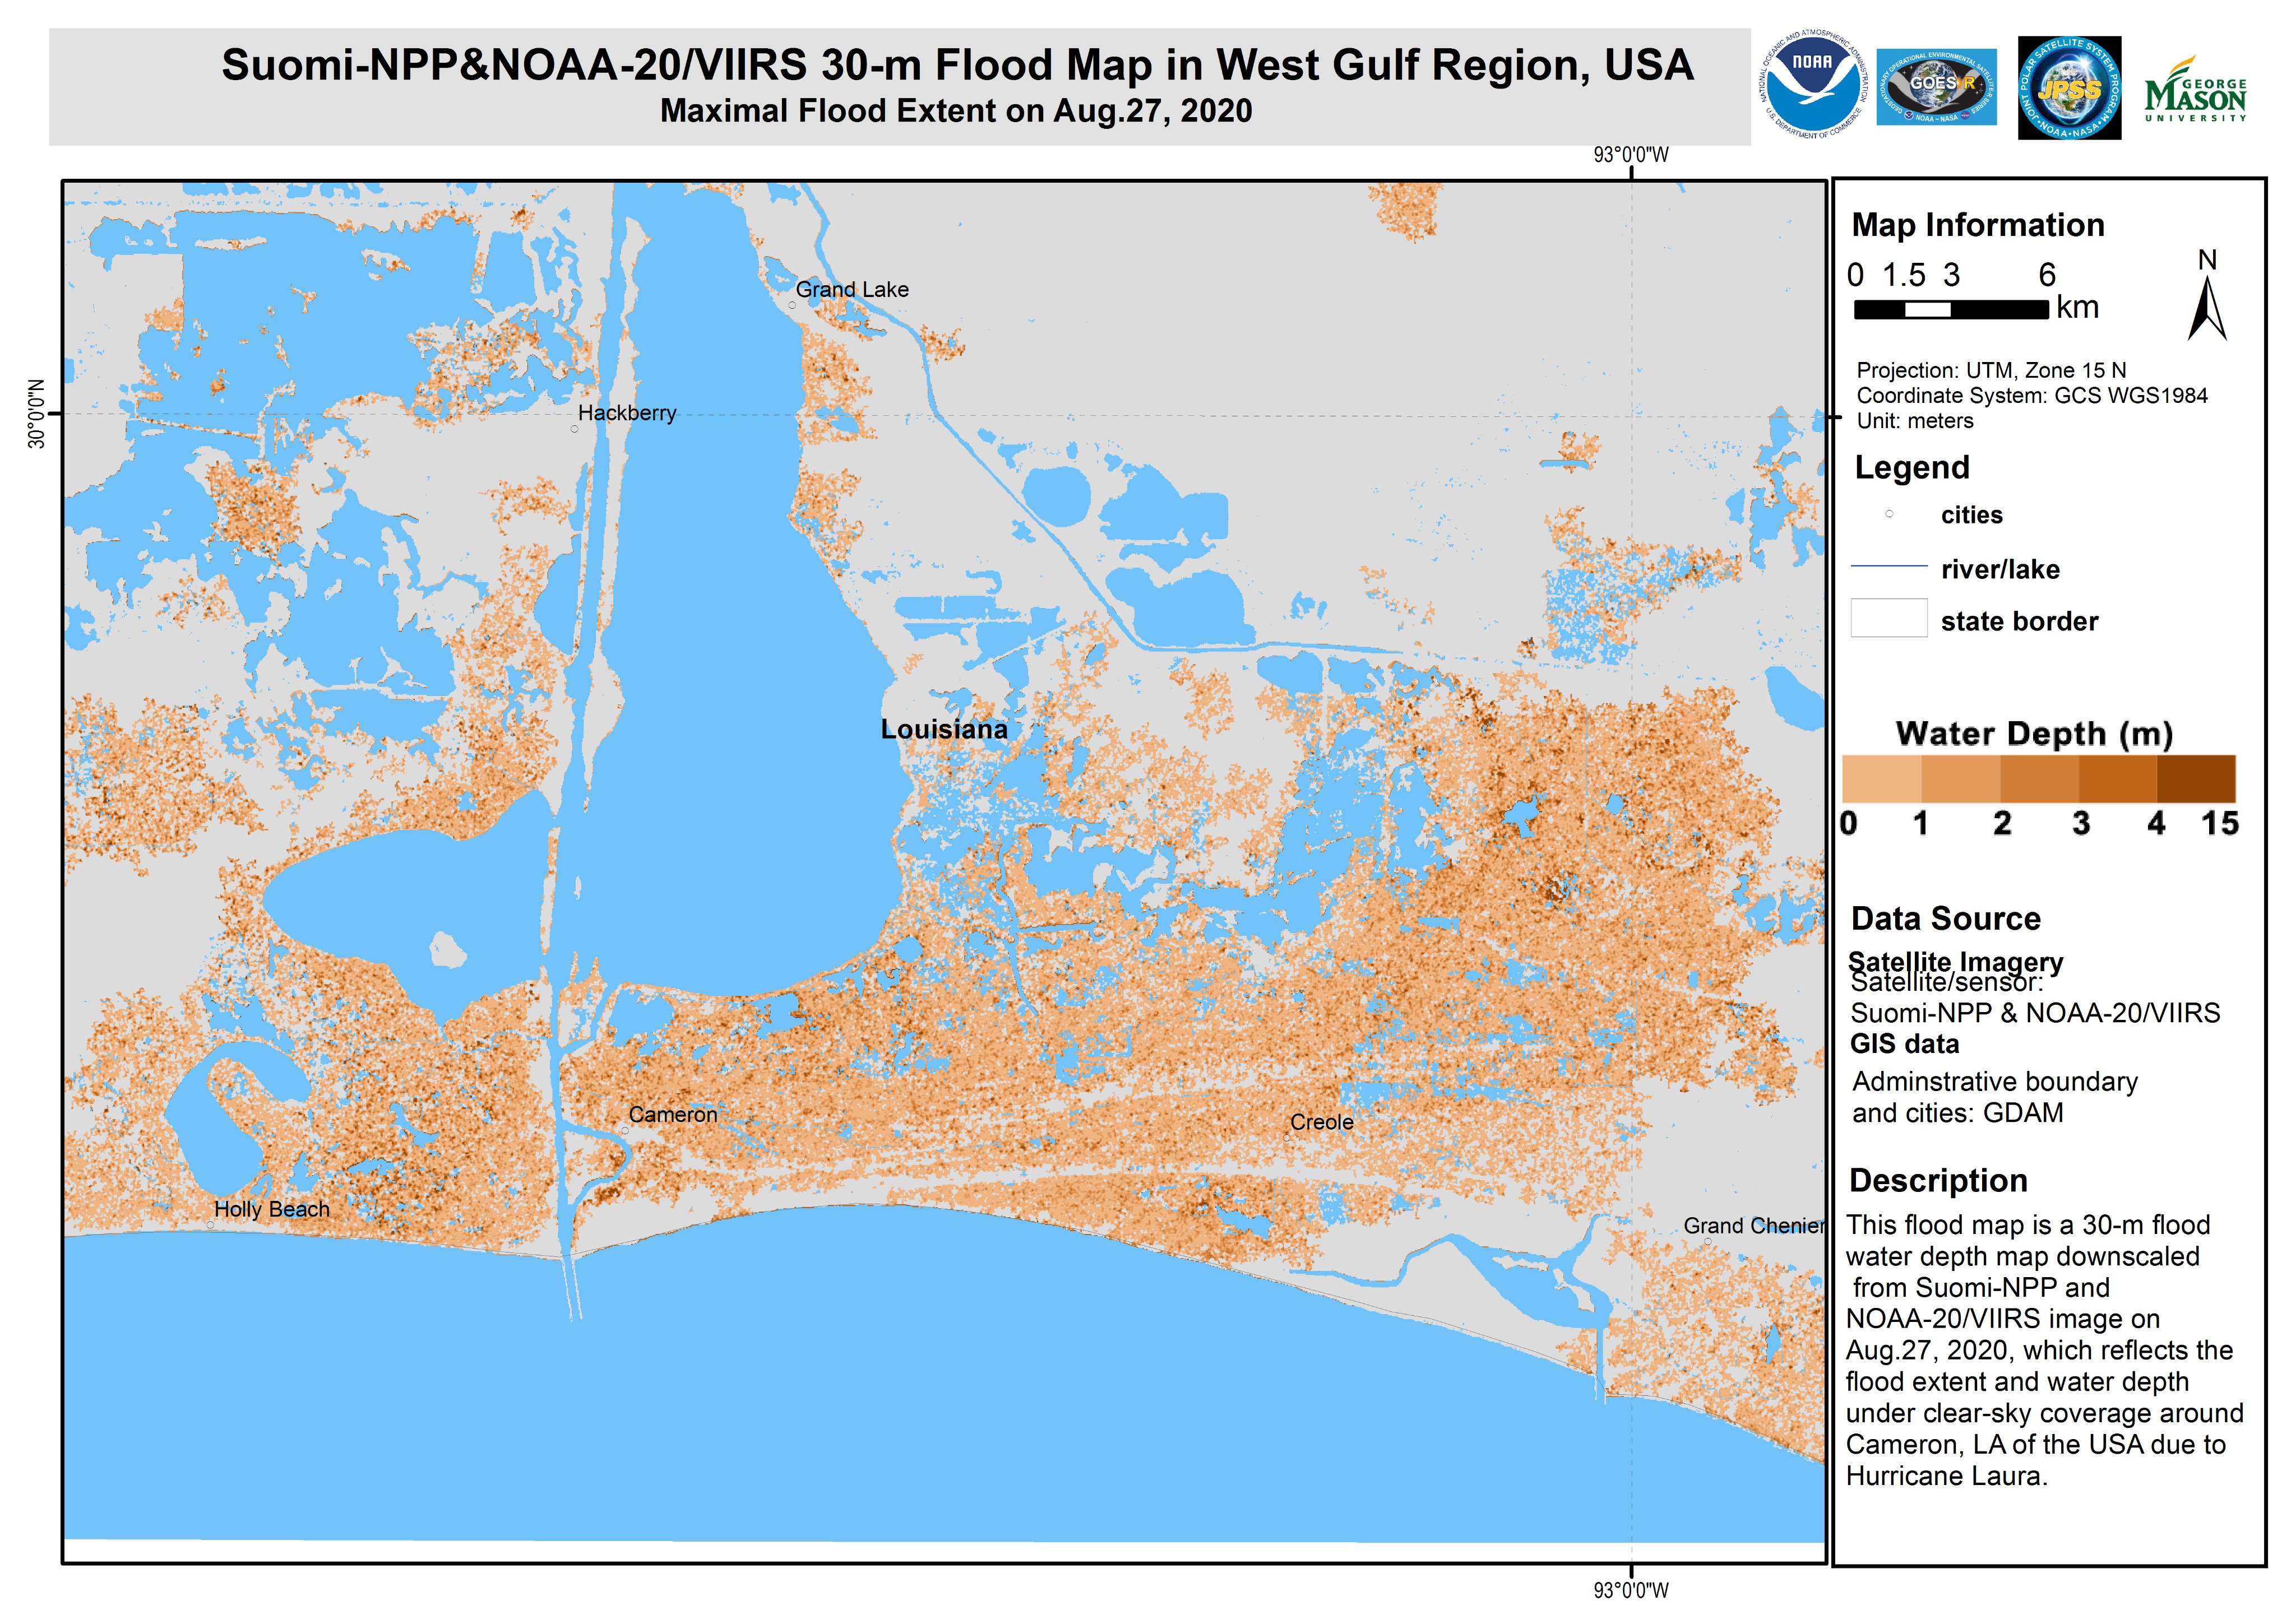 A map of the West Gulf Region of Louisiana. Water is shown in blue and dry land in grey. Floodwaters are shown in progressive shades of brown with dark brown as the deepest waters. Nearly all of the area on the border of the Gulf of Mexico is colored in mid to deep shades of brown.